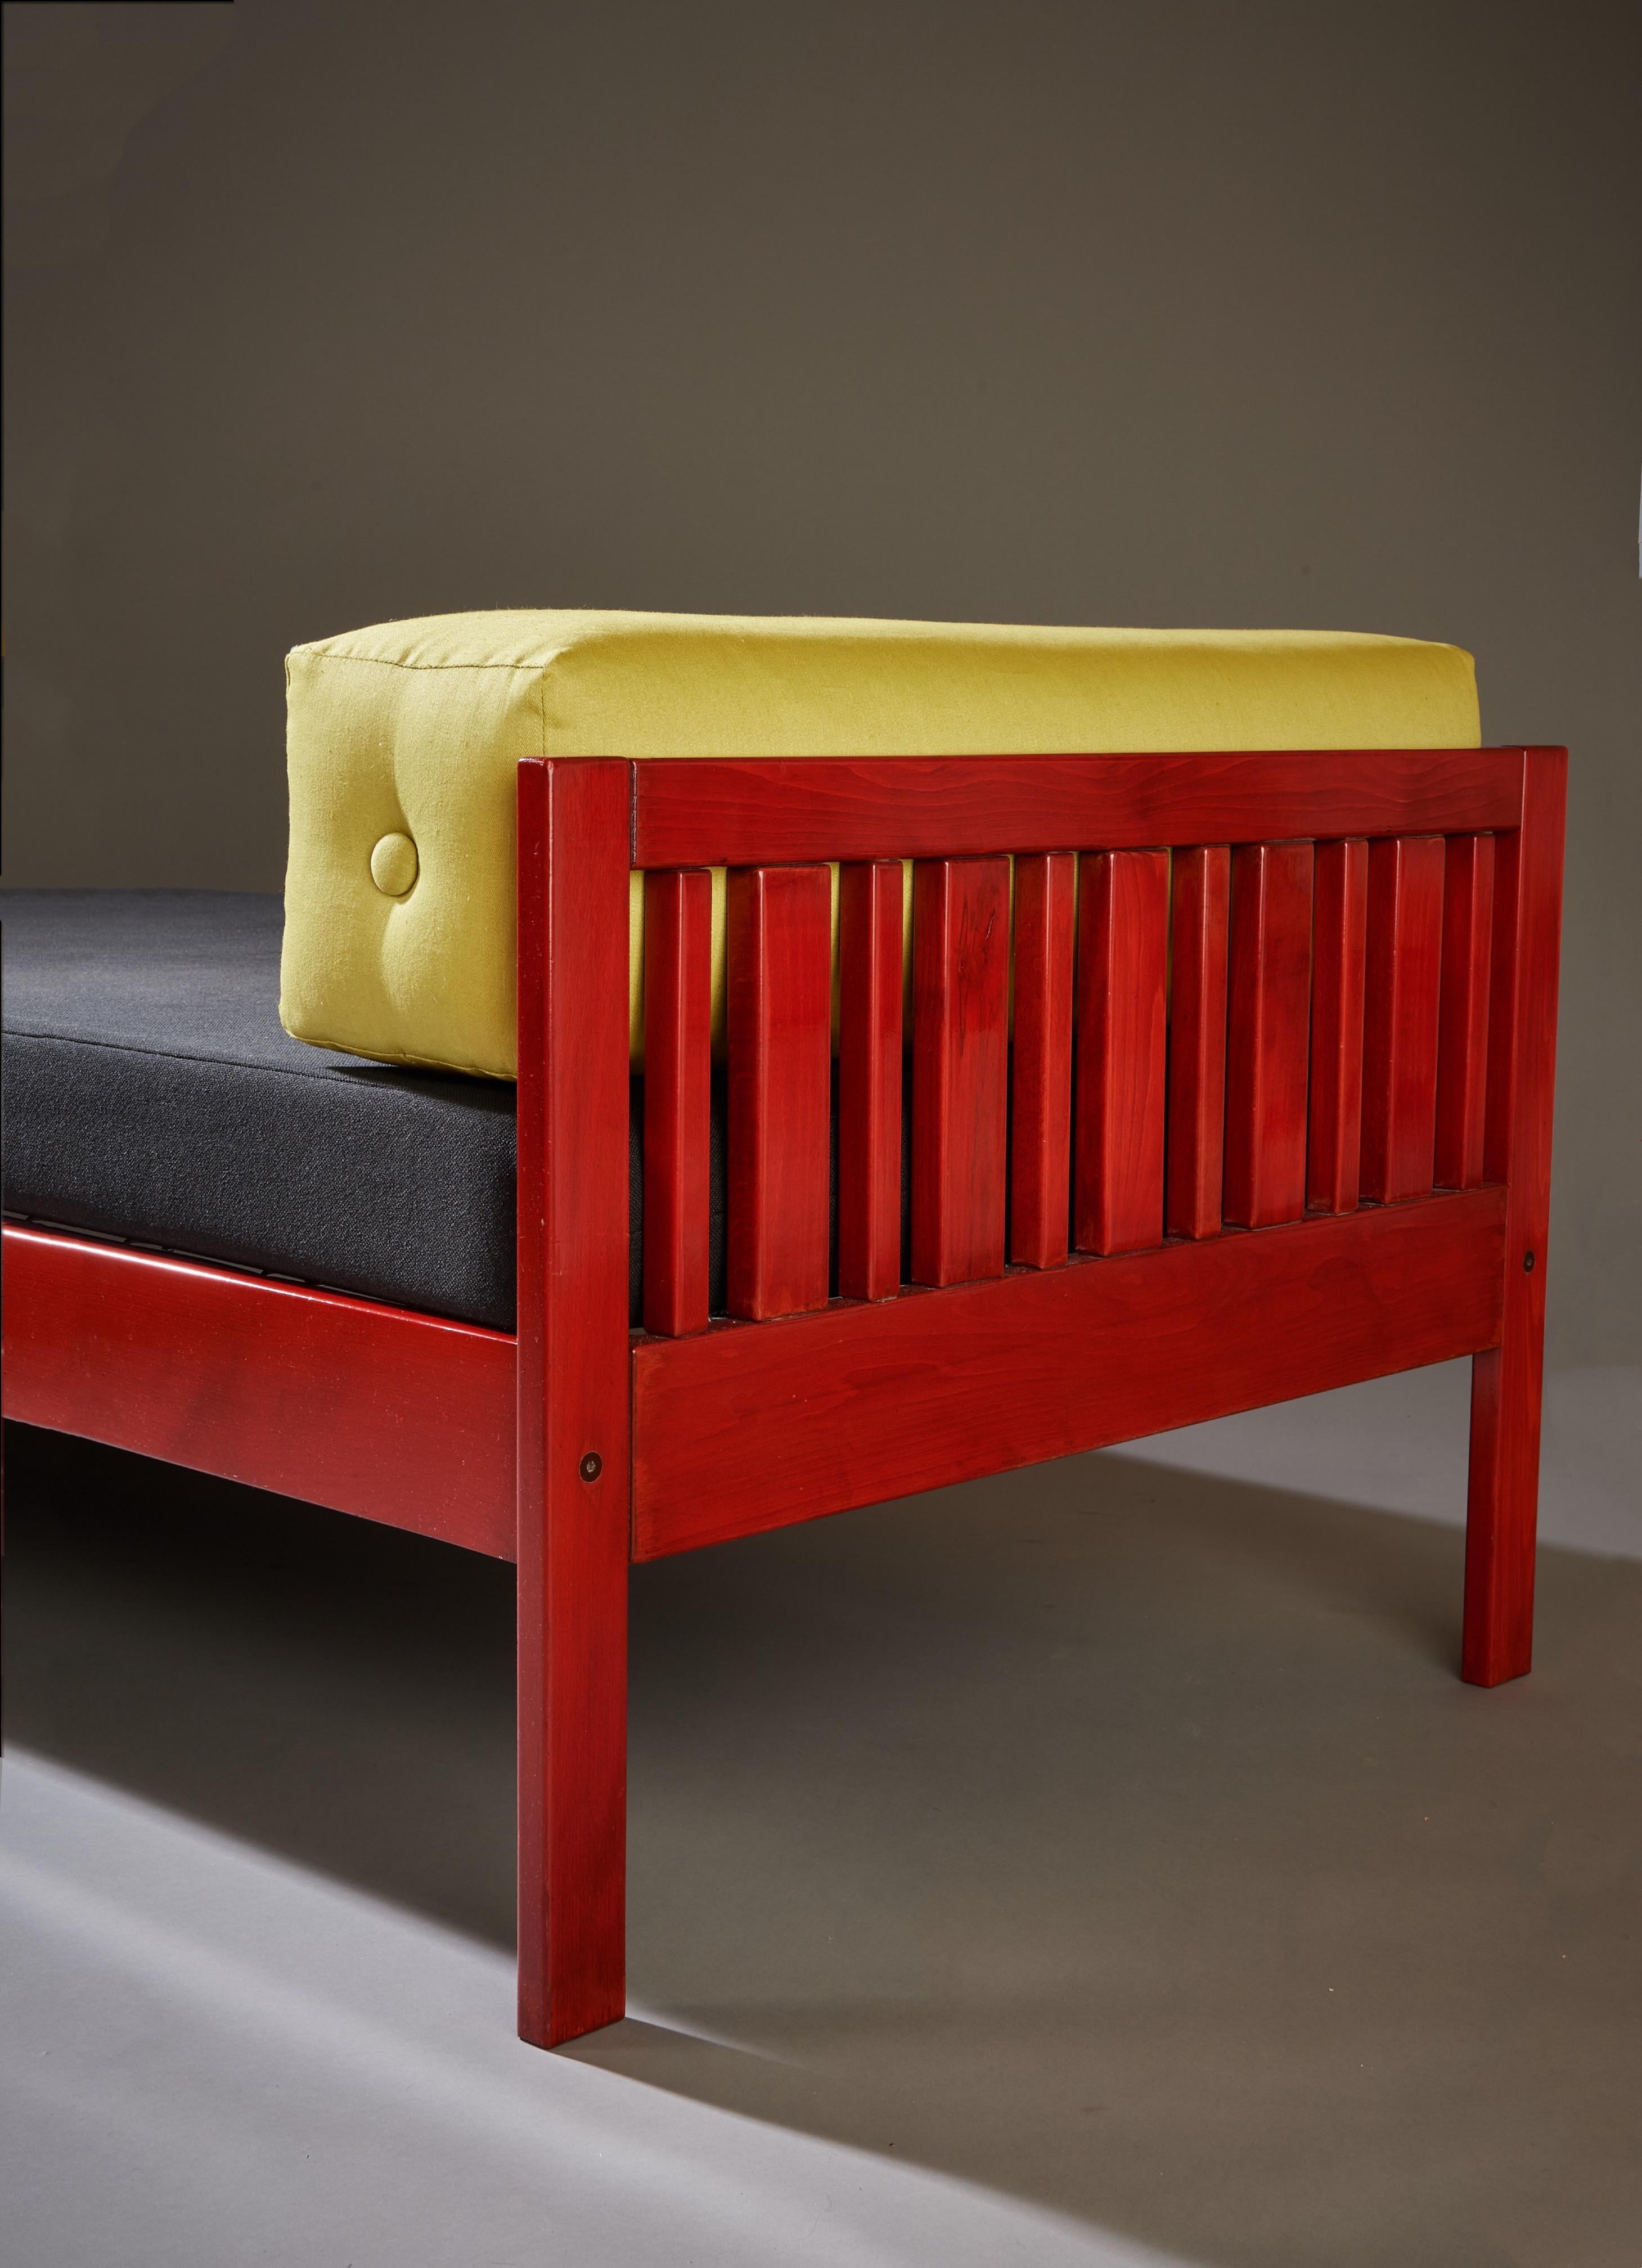 Ettore Sottsass Daybed, Red Lacquered Wood, Chartreuse Upholstery, Italy c. 1962 For Sale 4